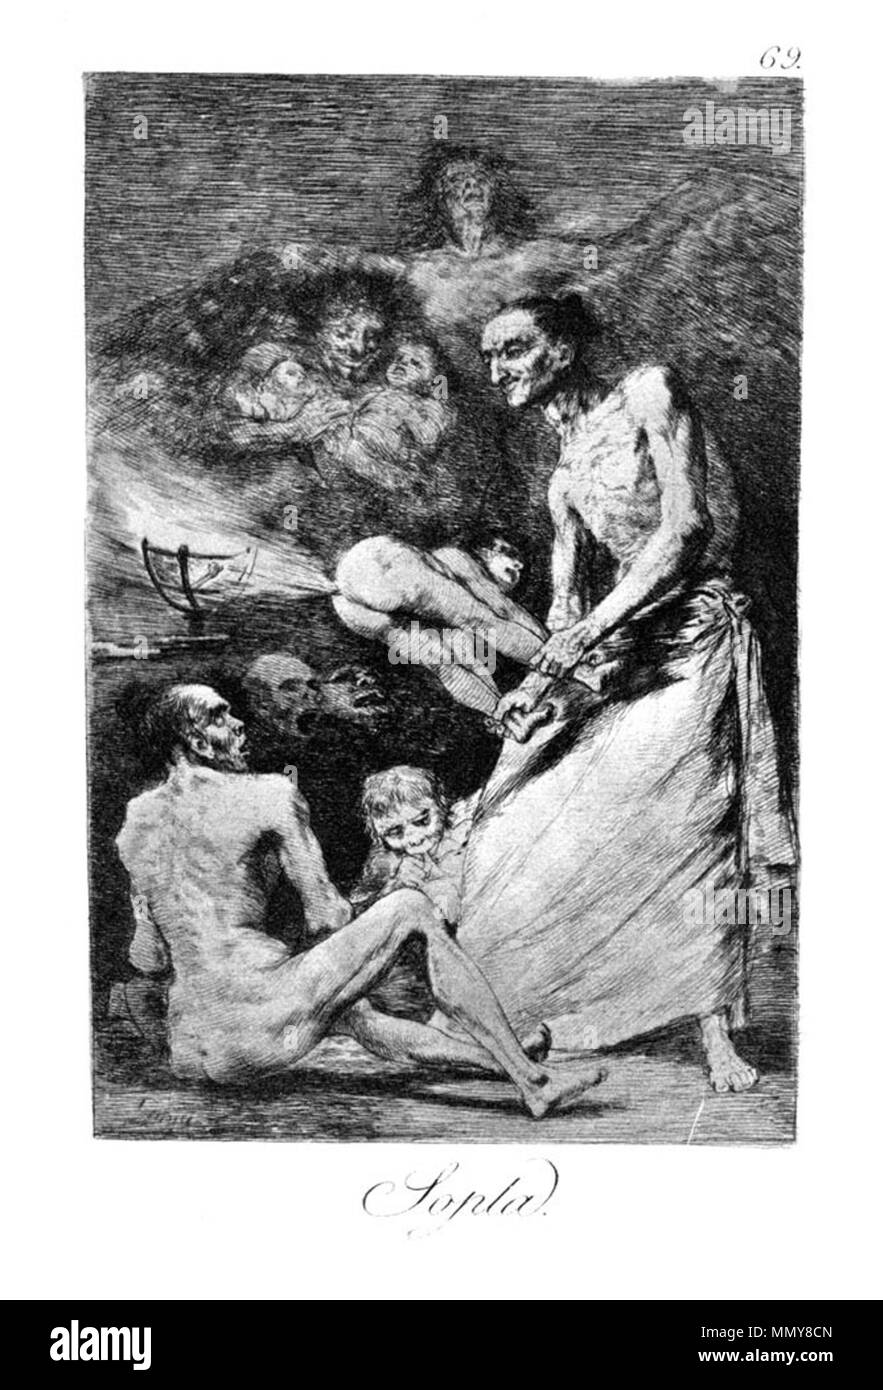 . Los Caprichos is a set of 80 aquatint prints created by Francisco Goya for release in 1799.  . 1799.   Francisco Goya  (1746–1828)      Alternative names Francisco Goya Lucientes, Francisco de Goya y Lucientes, Francisco José Goya Lucientes  Description Spanish painter, printmaker, lithographer, engraver and etcher  Date of birth/death 30 March 1746 16 April 1828  Location of birth/death Fuendetodos Bordeaux  Work location Madrid, Zaragoza, Bordeaux  Authority control  : Q5432 VIAF:?54343141 ISNI:?0000 0001 2280 1608 ULAN:?500118936 LCCN:?n79003363 NLA:?36545788 WorldCat Goya - Caprichos (69 Stock Photo